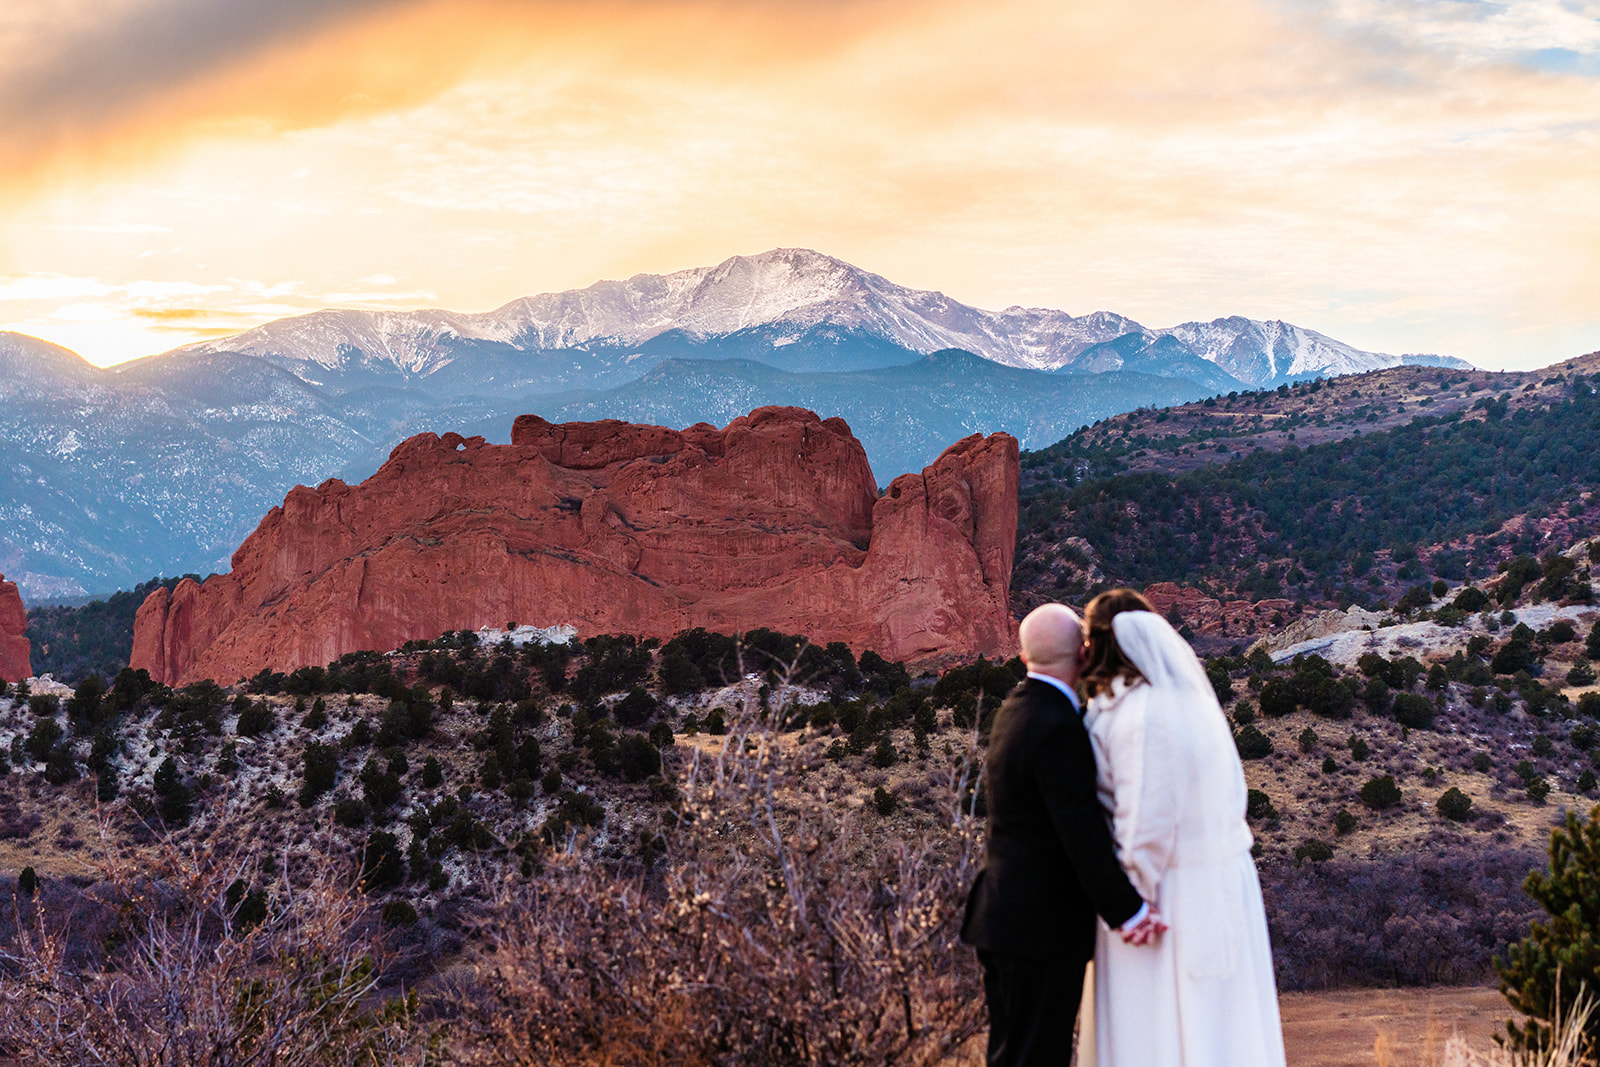 A bride and groom kiss with a backdrop of red rock formations and snow-capped mountains at sunset during their Garden of the Gods elopement.